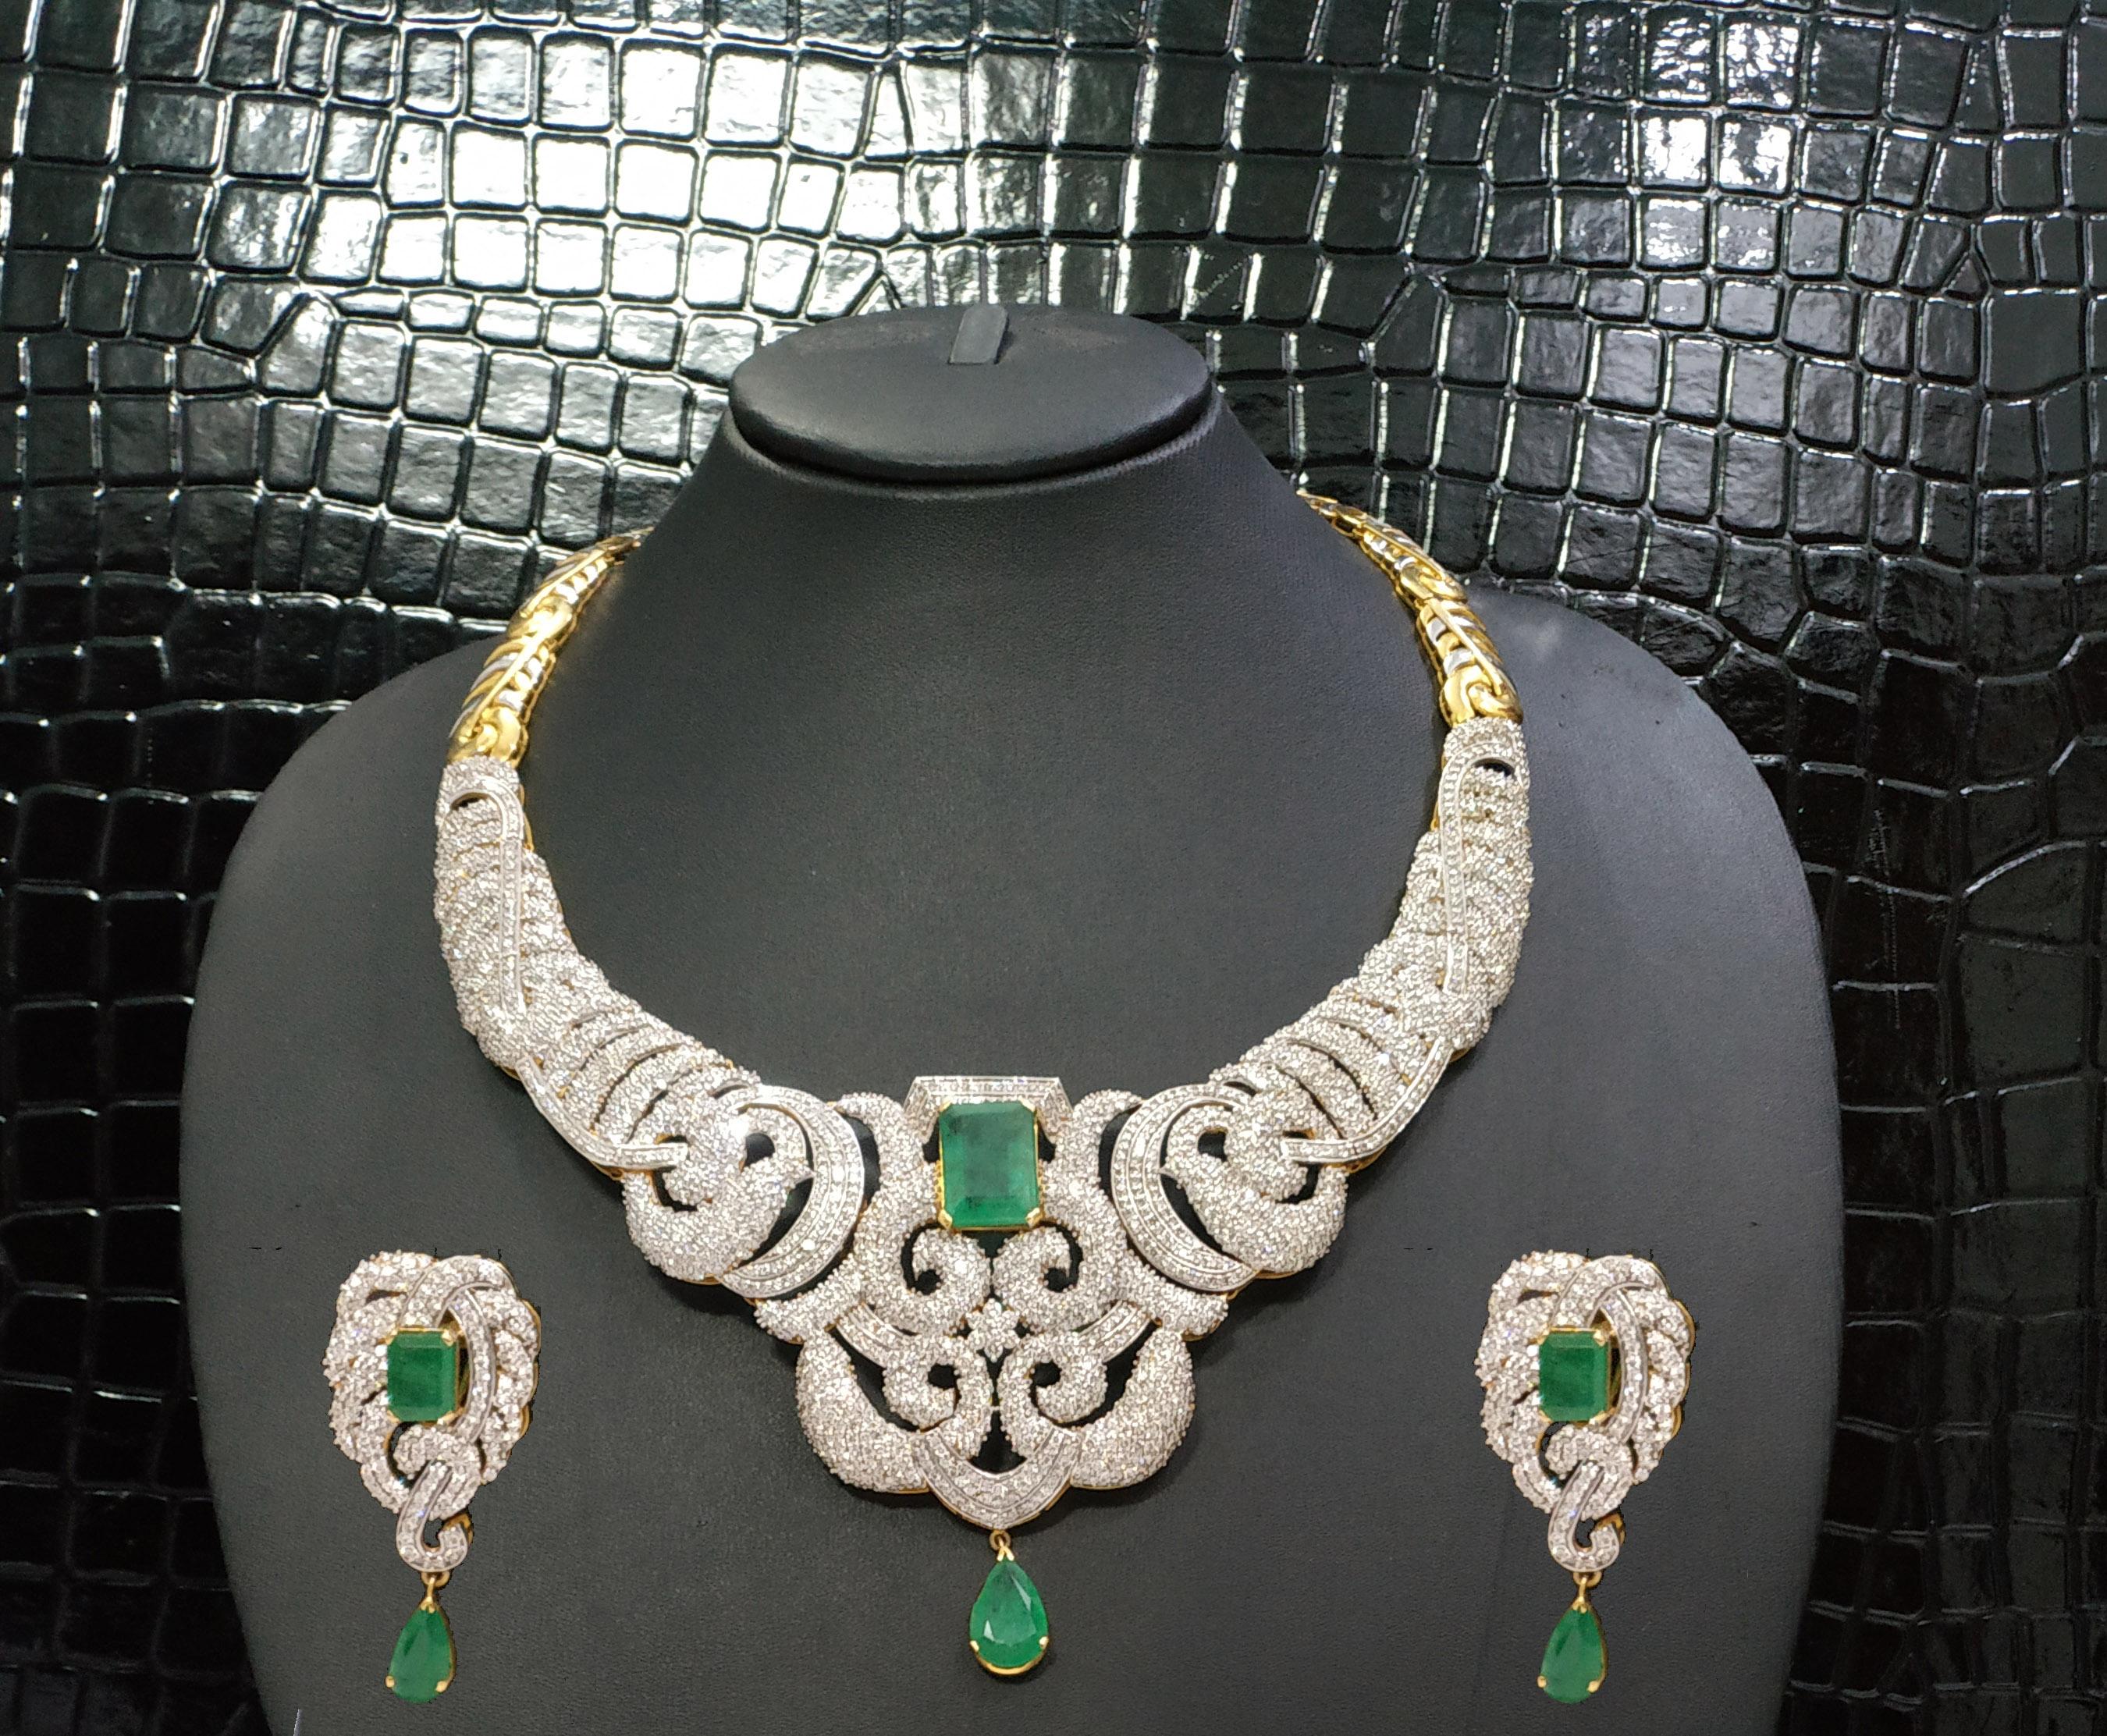 42 carat round brilliant diamonds and 25 carat emerald
18 carat Gold
Necklace and matching pair of earrings
The whole necklace is made in 18 carat gold and weighs 134 grams  